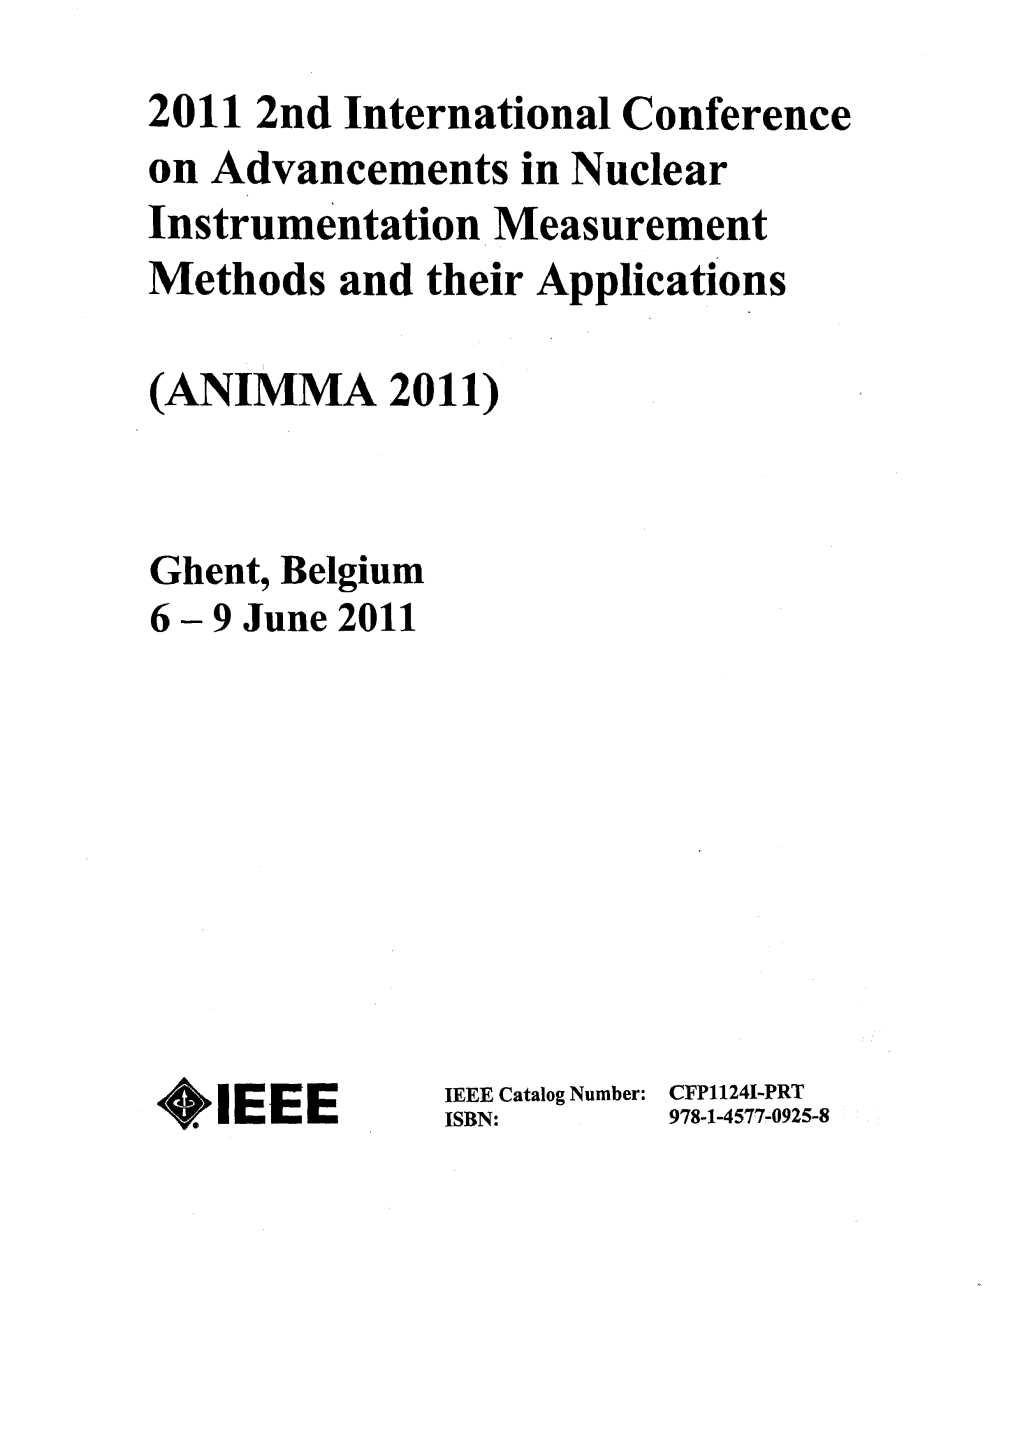 2011 2Nd International Conference on Advancements in Nuclear Instrumentation Measurement Methods and Their Applications